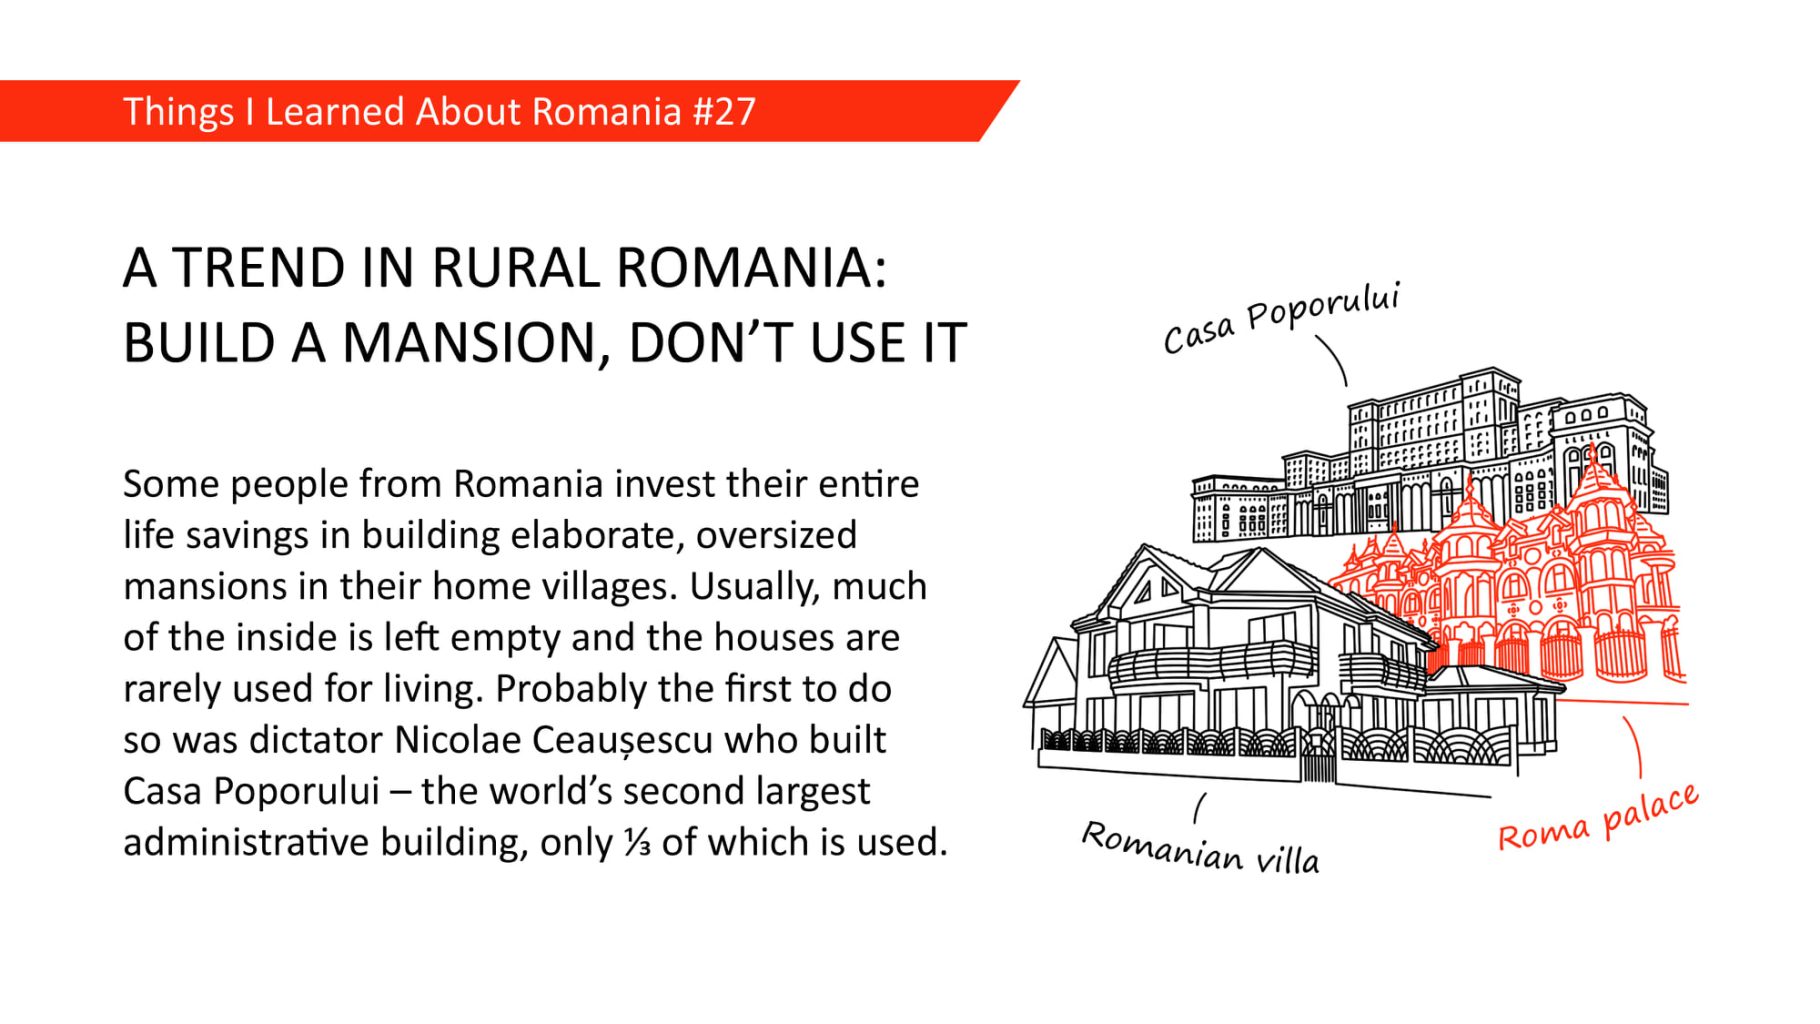 A TREND IN RURAL ROMANIA: BUILD A MANSION, DON'T USE IT - Some people from Romania invest their entire life savings in building elaborate, oversized mansions in their home villages. Usually, much of the inside is left empty and the houses are rarely used for living. Probably the first to do so was dictator Nicola Ceausescu who built Casa Poporului - the world's second largest administrative building, only ⅓ of which is used.